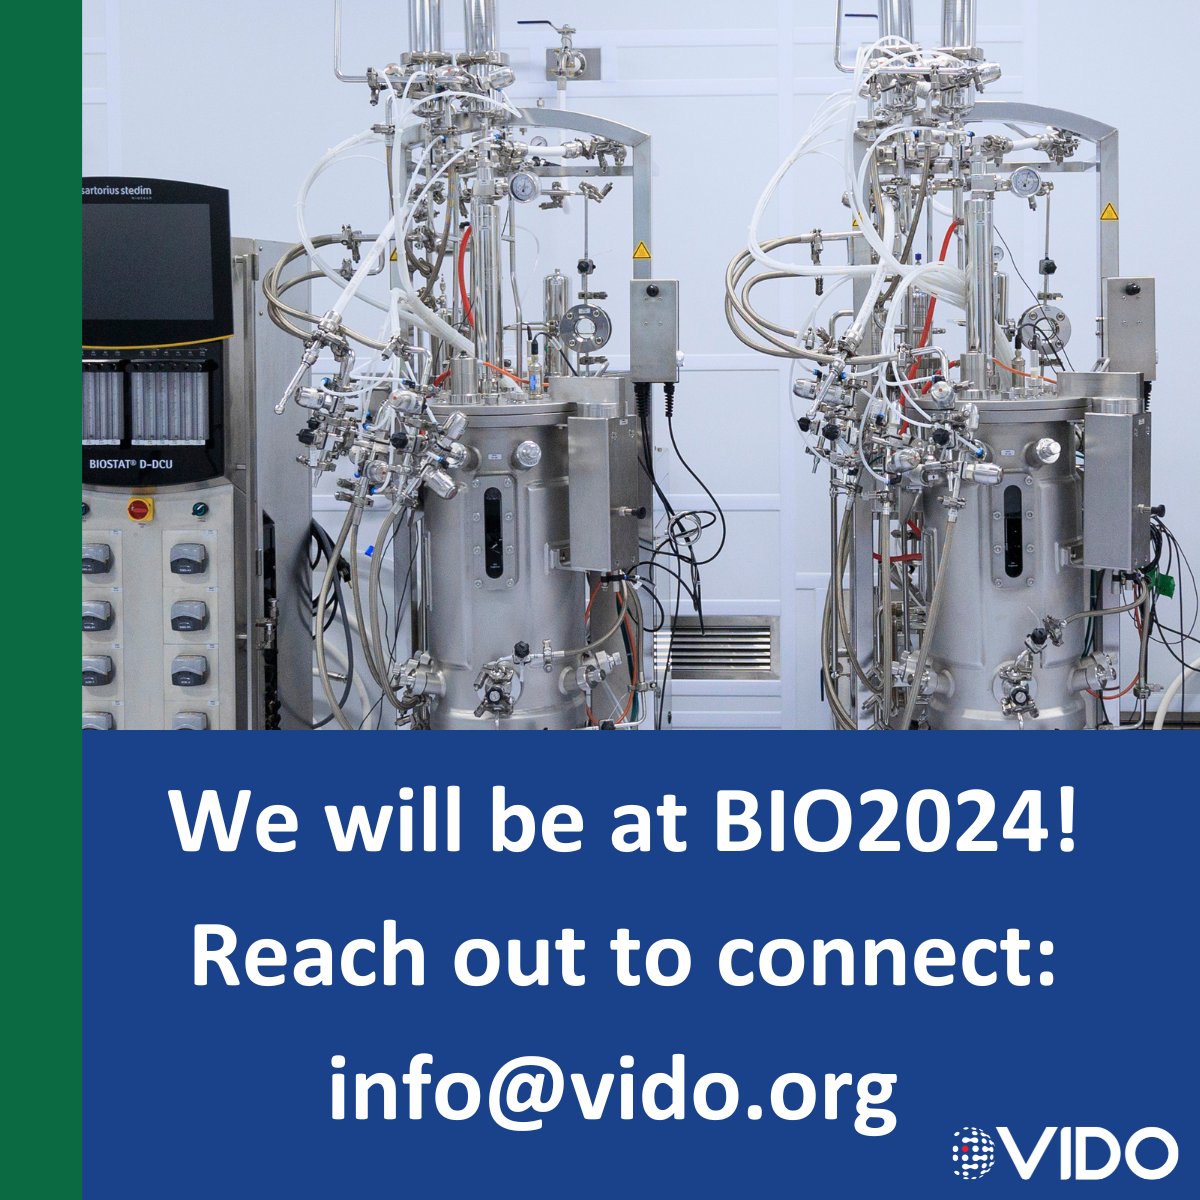 We are excited about our presence at the upcoming #BIO2024 Conference, connecting with biotech leaders and life science innovators! Let's build collaborations that drive progress together. @IAmBiotech #animalhealth #humanhealth #vaccines #therapeutics